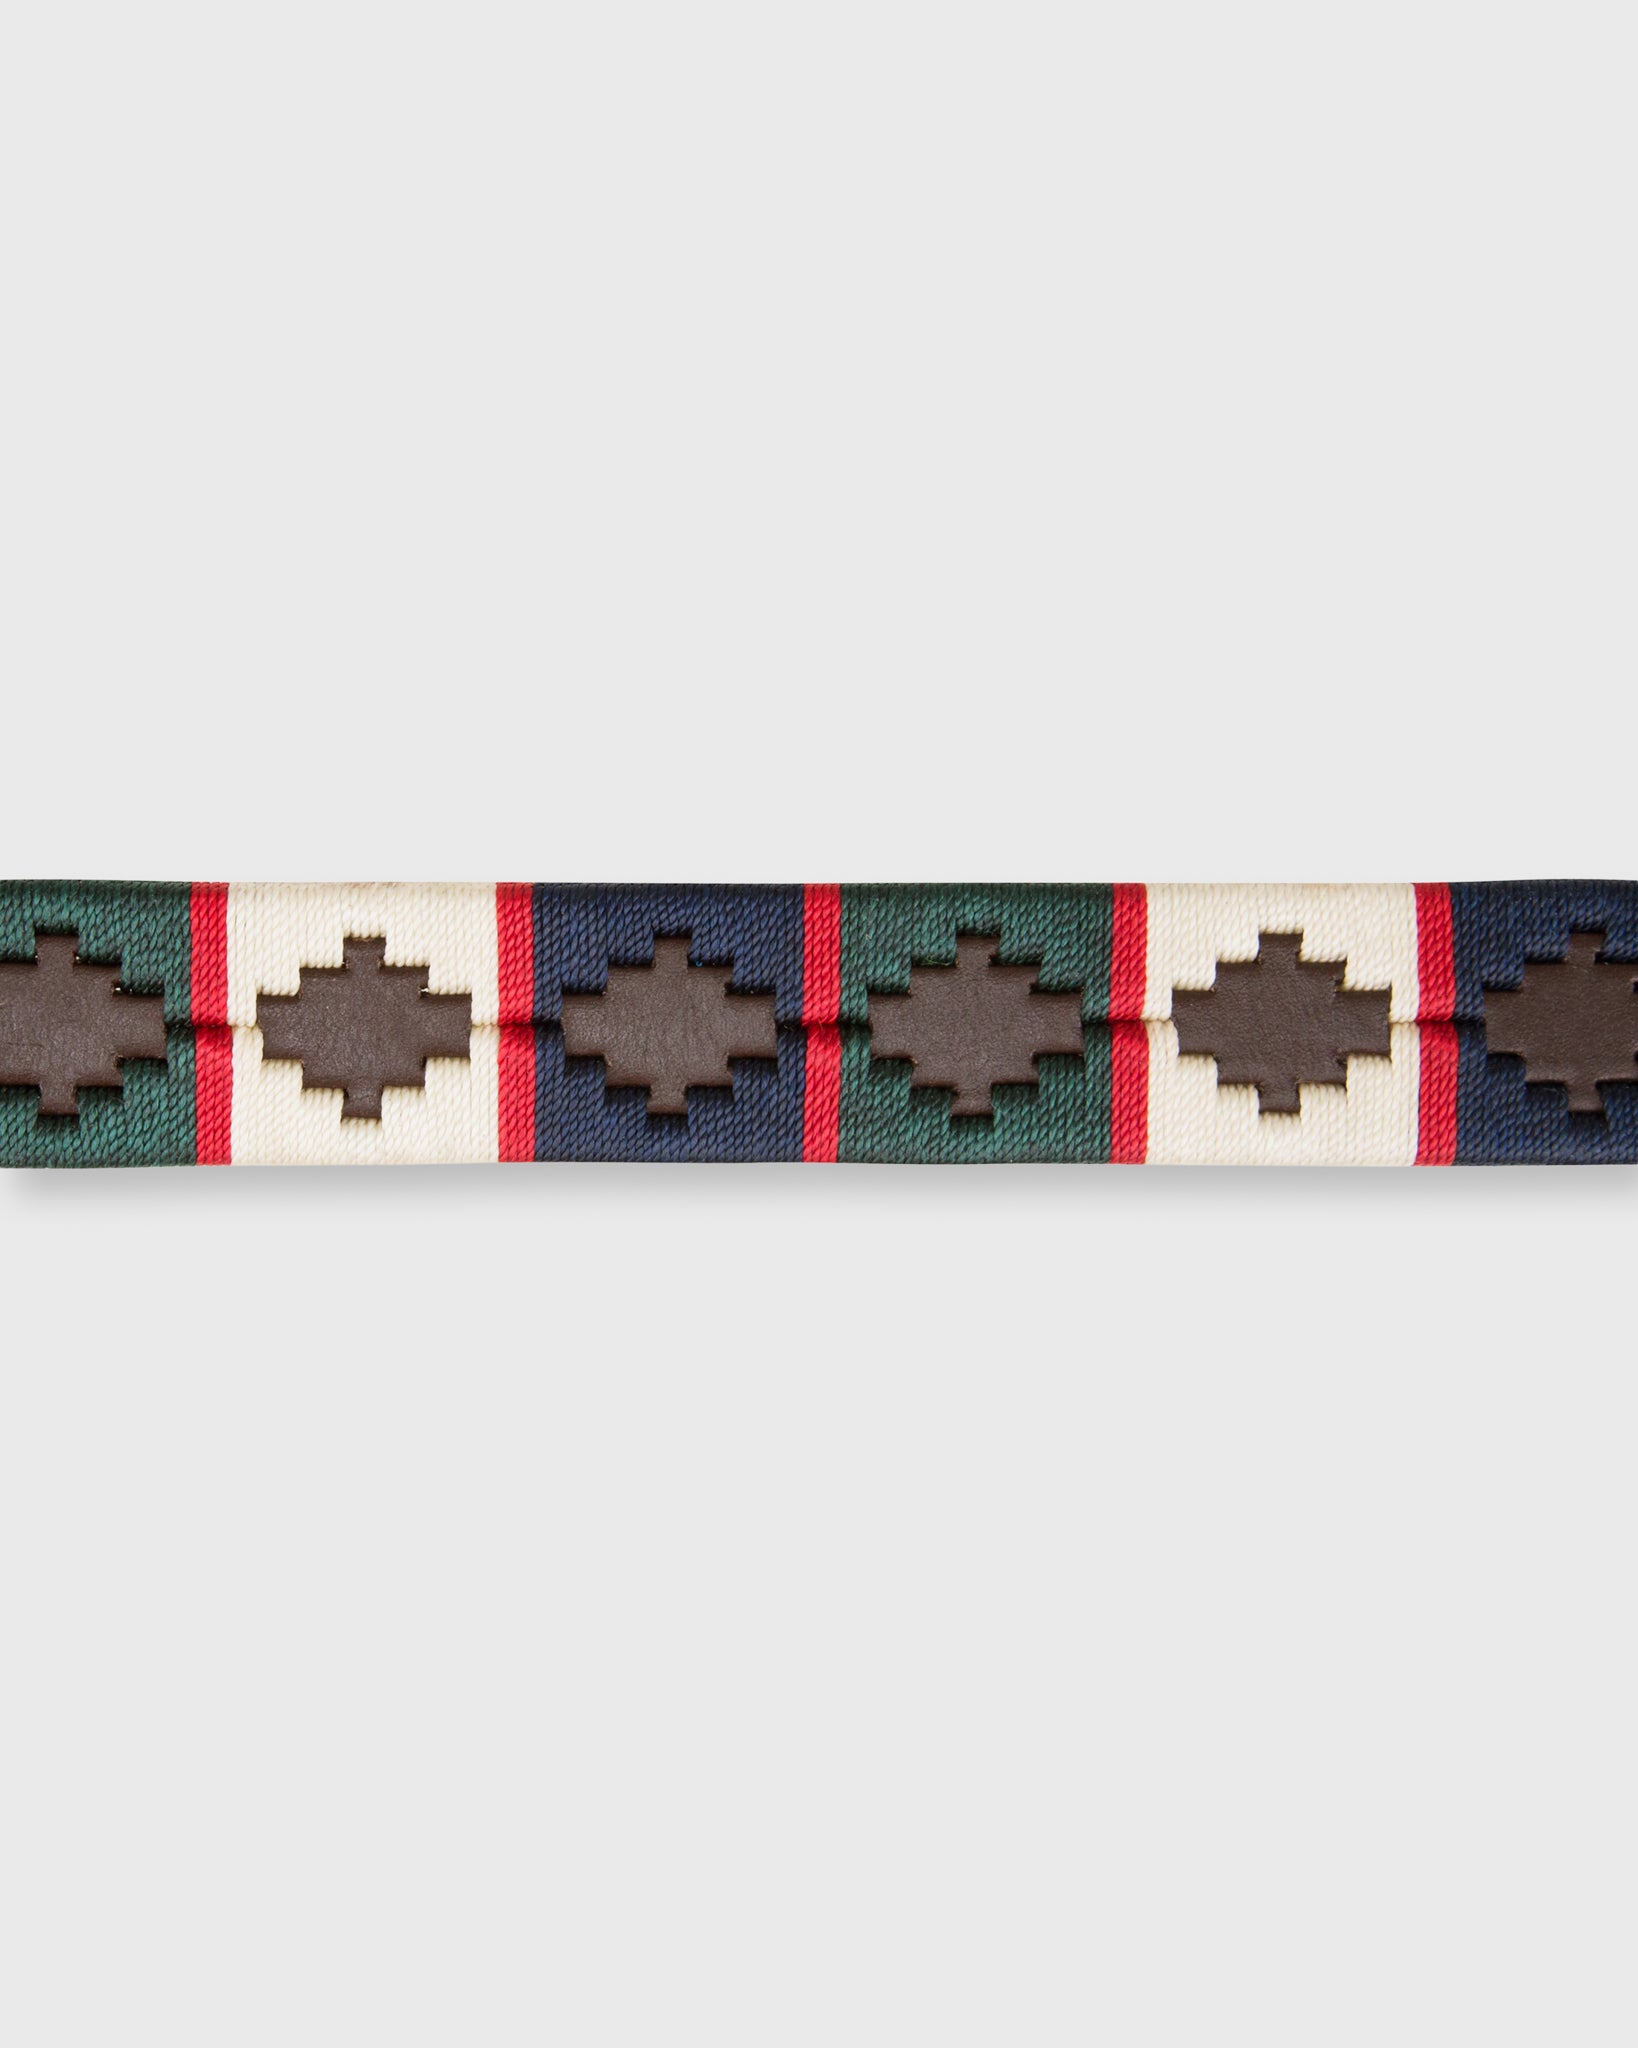 1 1/8" Polo Belt Cream/Red/Navy/Green Chocolate Leather